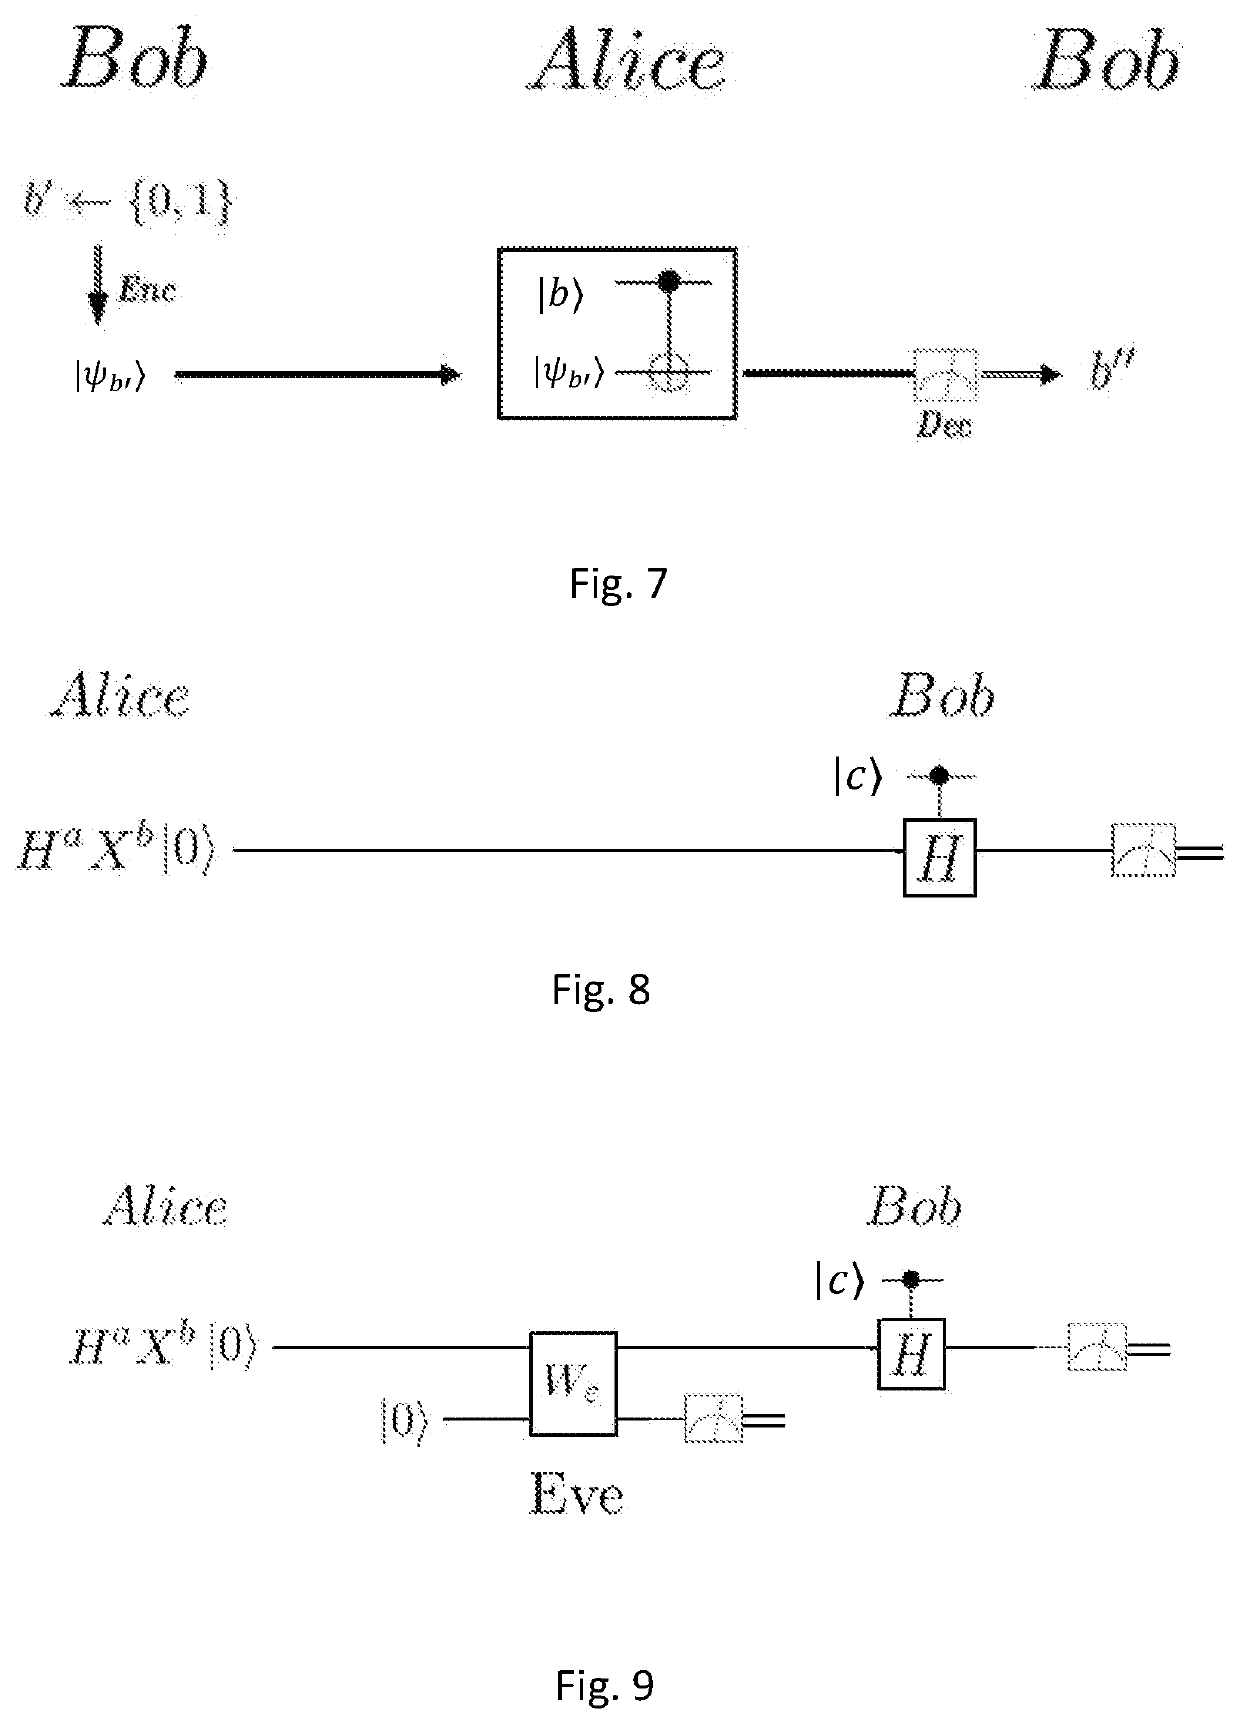 System and Method for Performing Information-Theoretically Secure Quantum Gate Computation and Quantum Key Distribution, Based on Random Rotation of Qubits